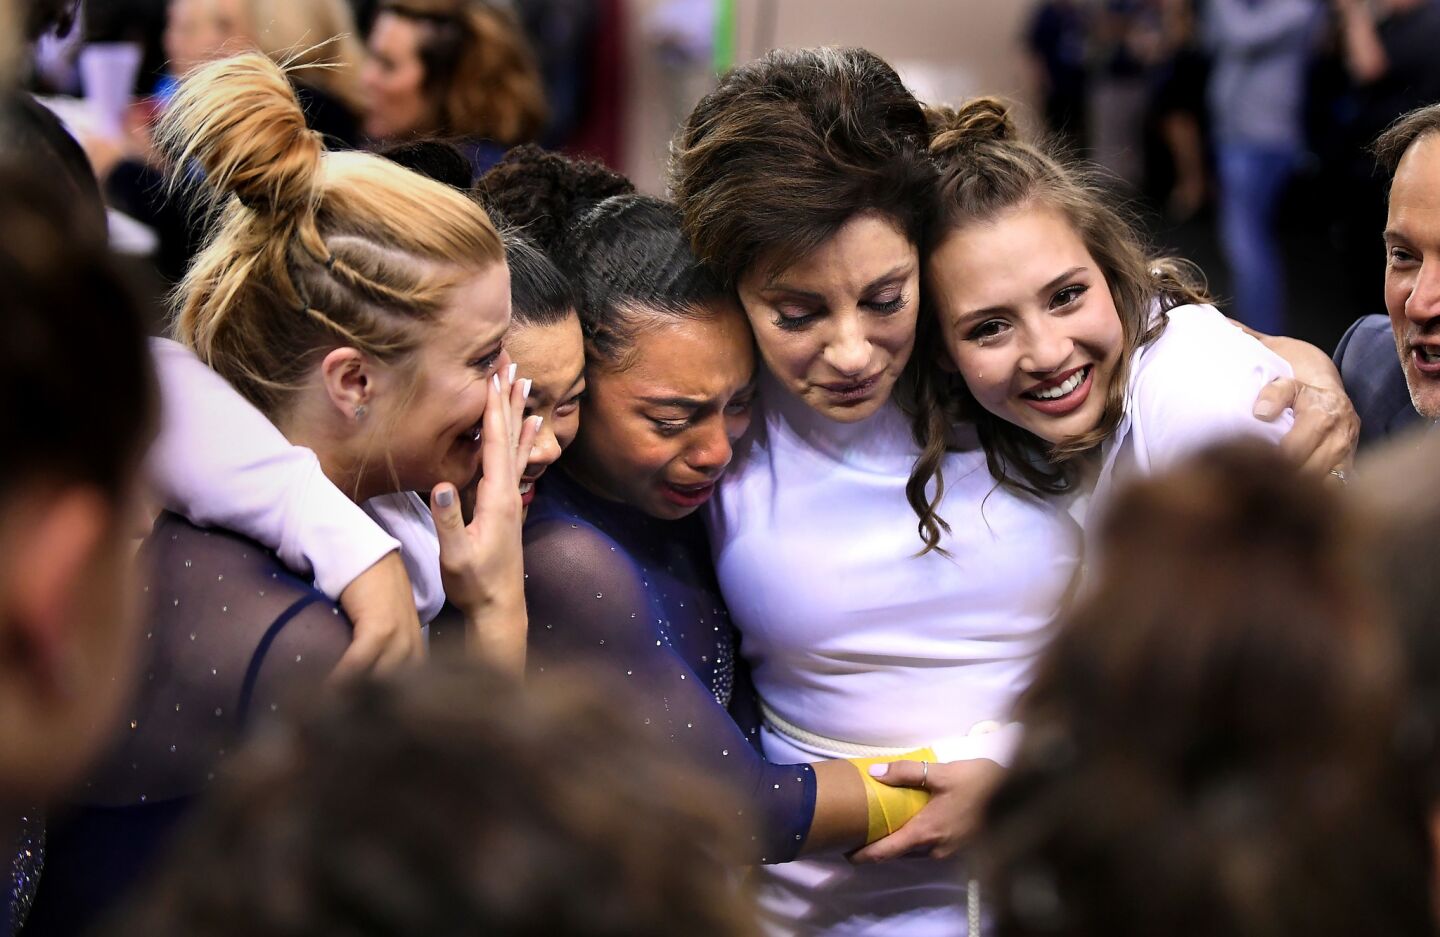 Coach Valorie Kondos Field, second from right, with, from left, Gracie Kramer, Anna Glenn, Margzetta Frazier and team manager Lila Waller after finishing third in the NCAA Gymnastics Championship at the Ft. Worth Convention Center Saturday.